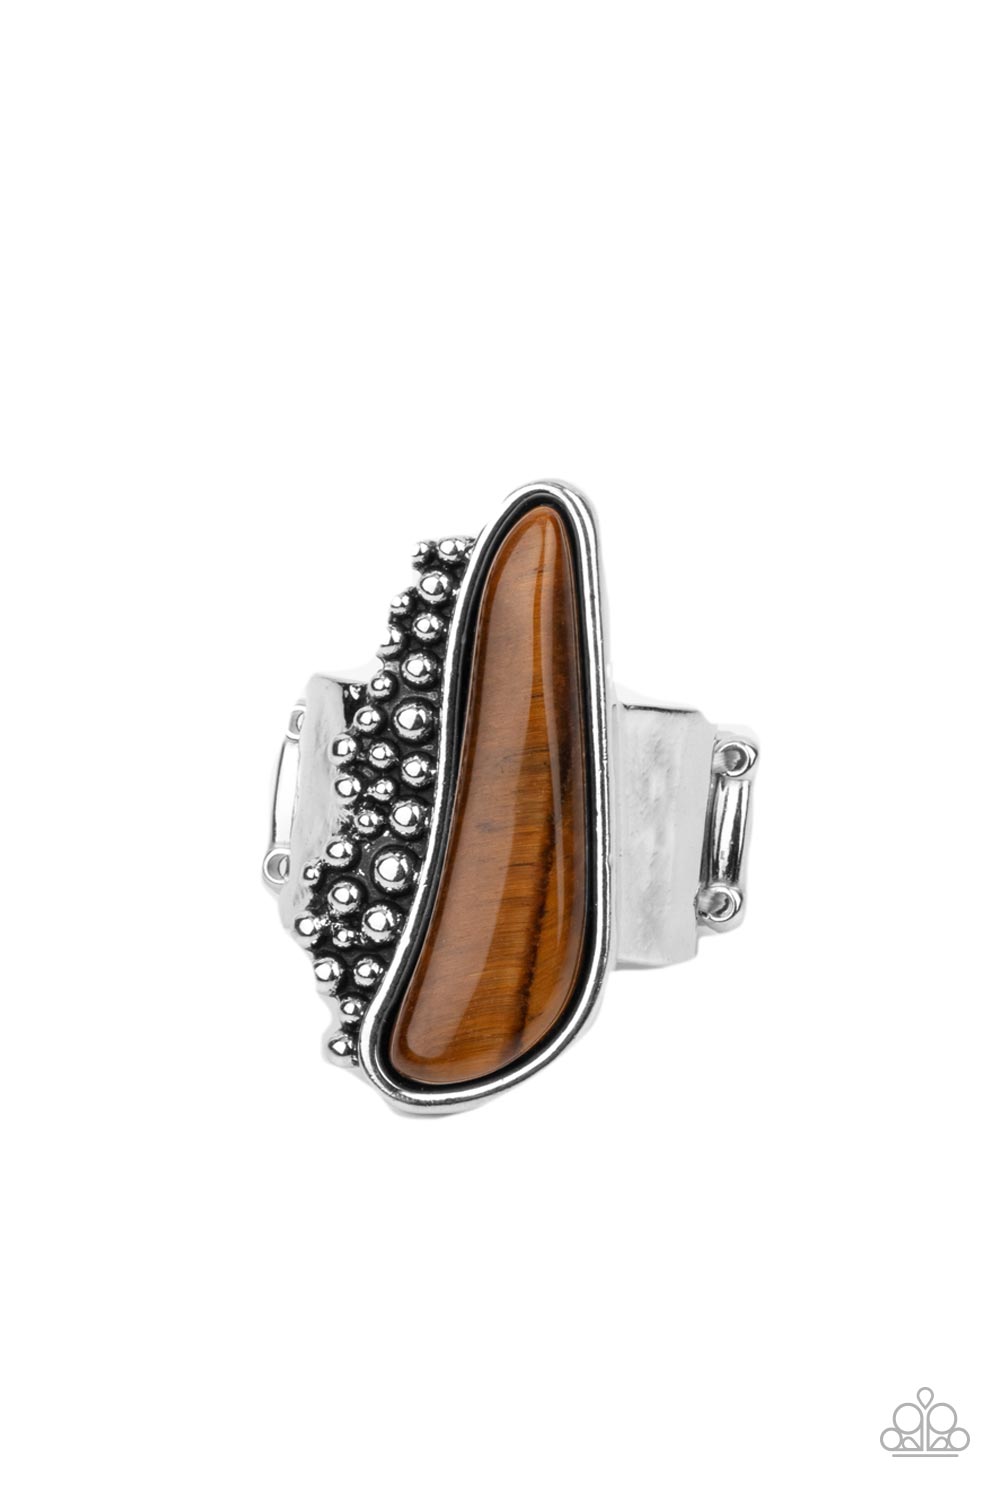 Gemstone Guide Brown Tiger&#39;s Eye Stone Ring - Paparazzi Accessories- lightbox - CarasShop.com - $5 Jewelry by Cara Jewels